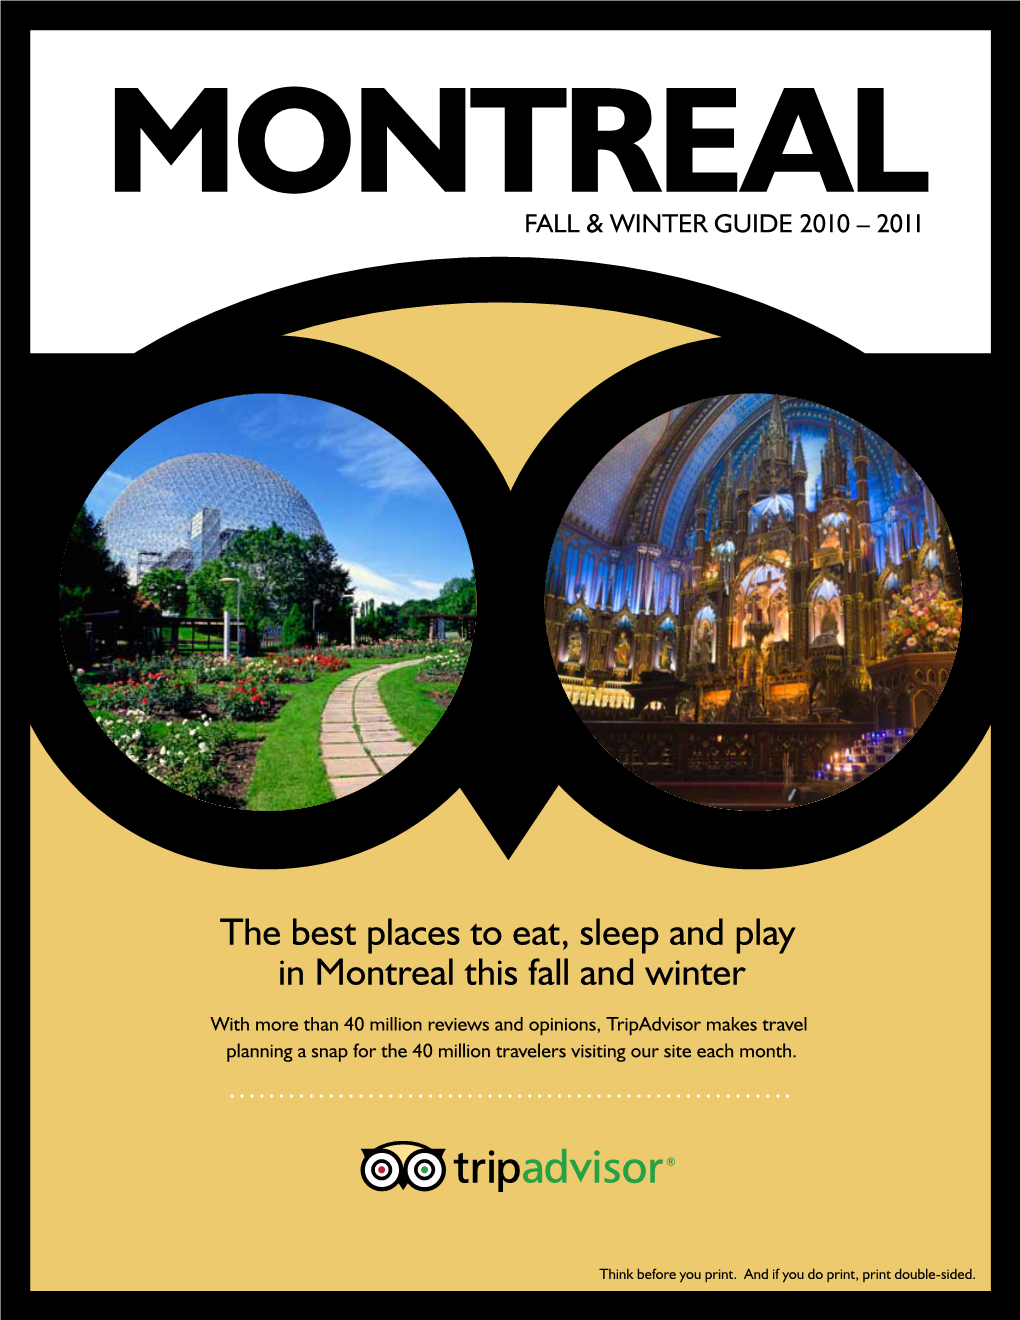 Montreal Fall & Winter Guide 2010 – 2011